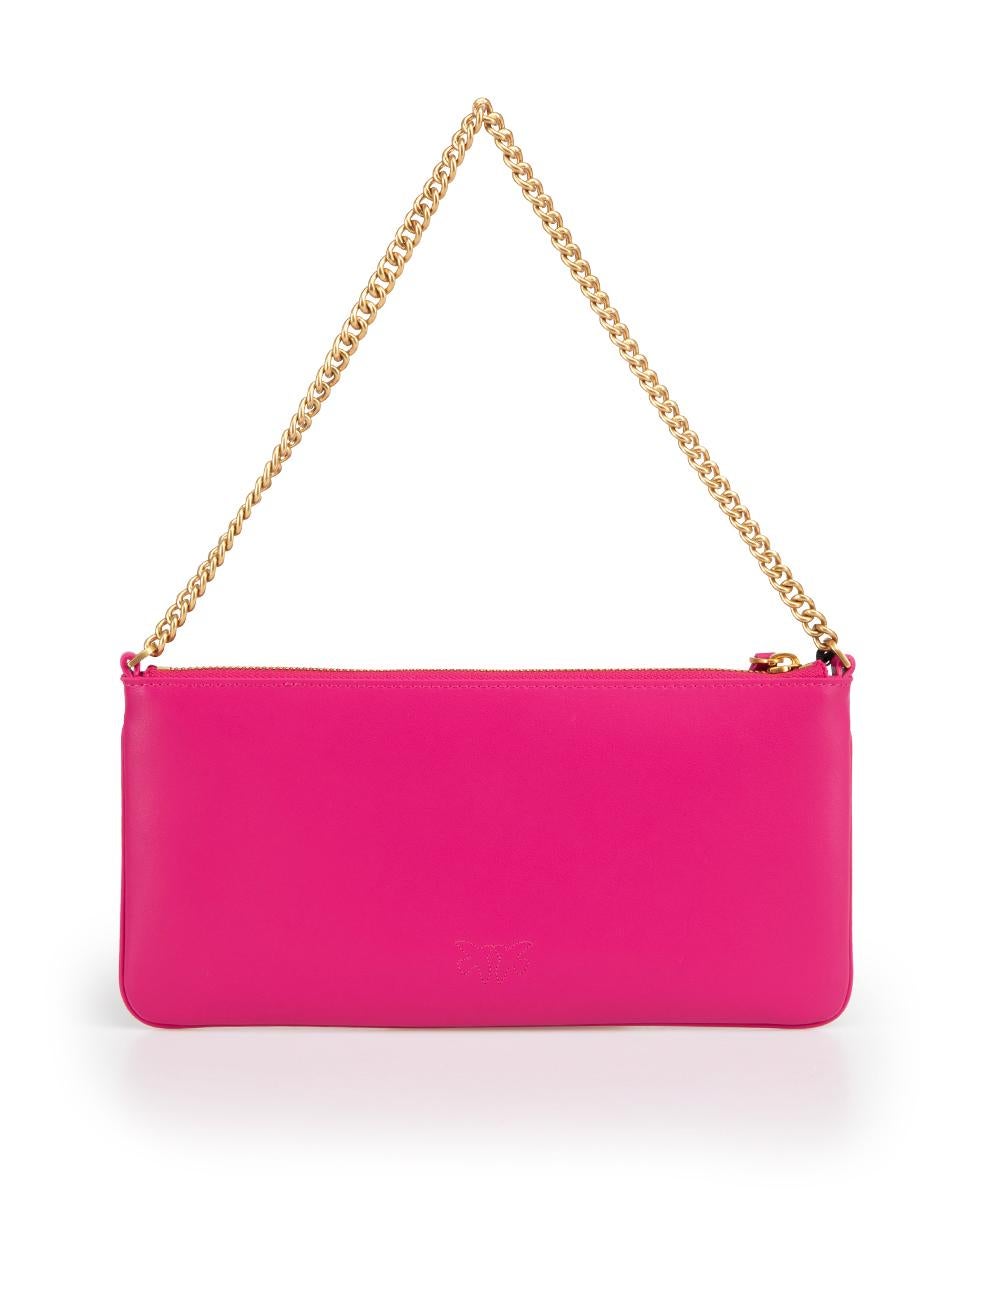 SS24 Pink Leather Horizontal Flat Shoulder Bag In New Condition For Sale In London, GB